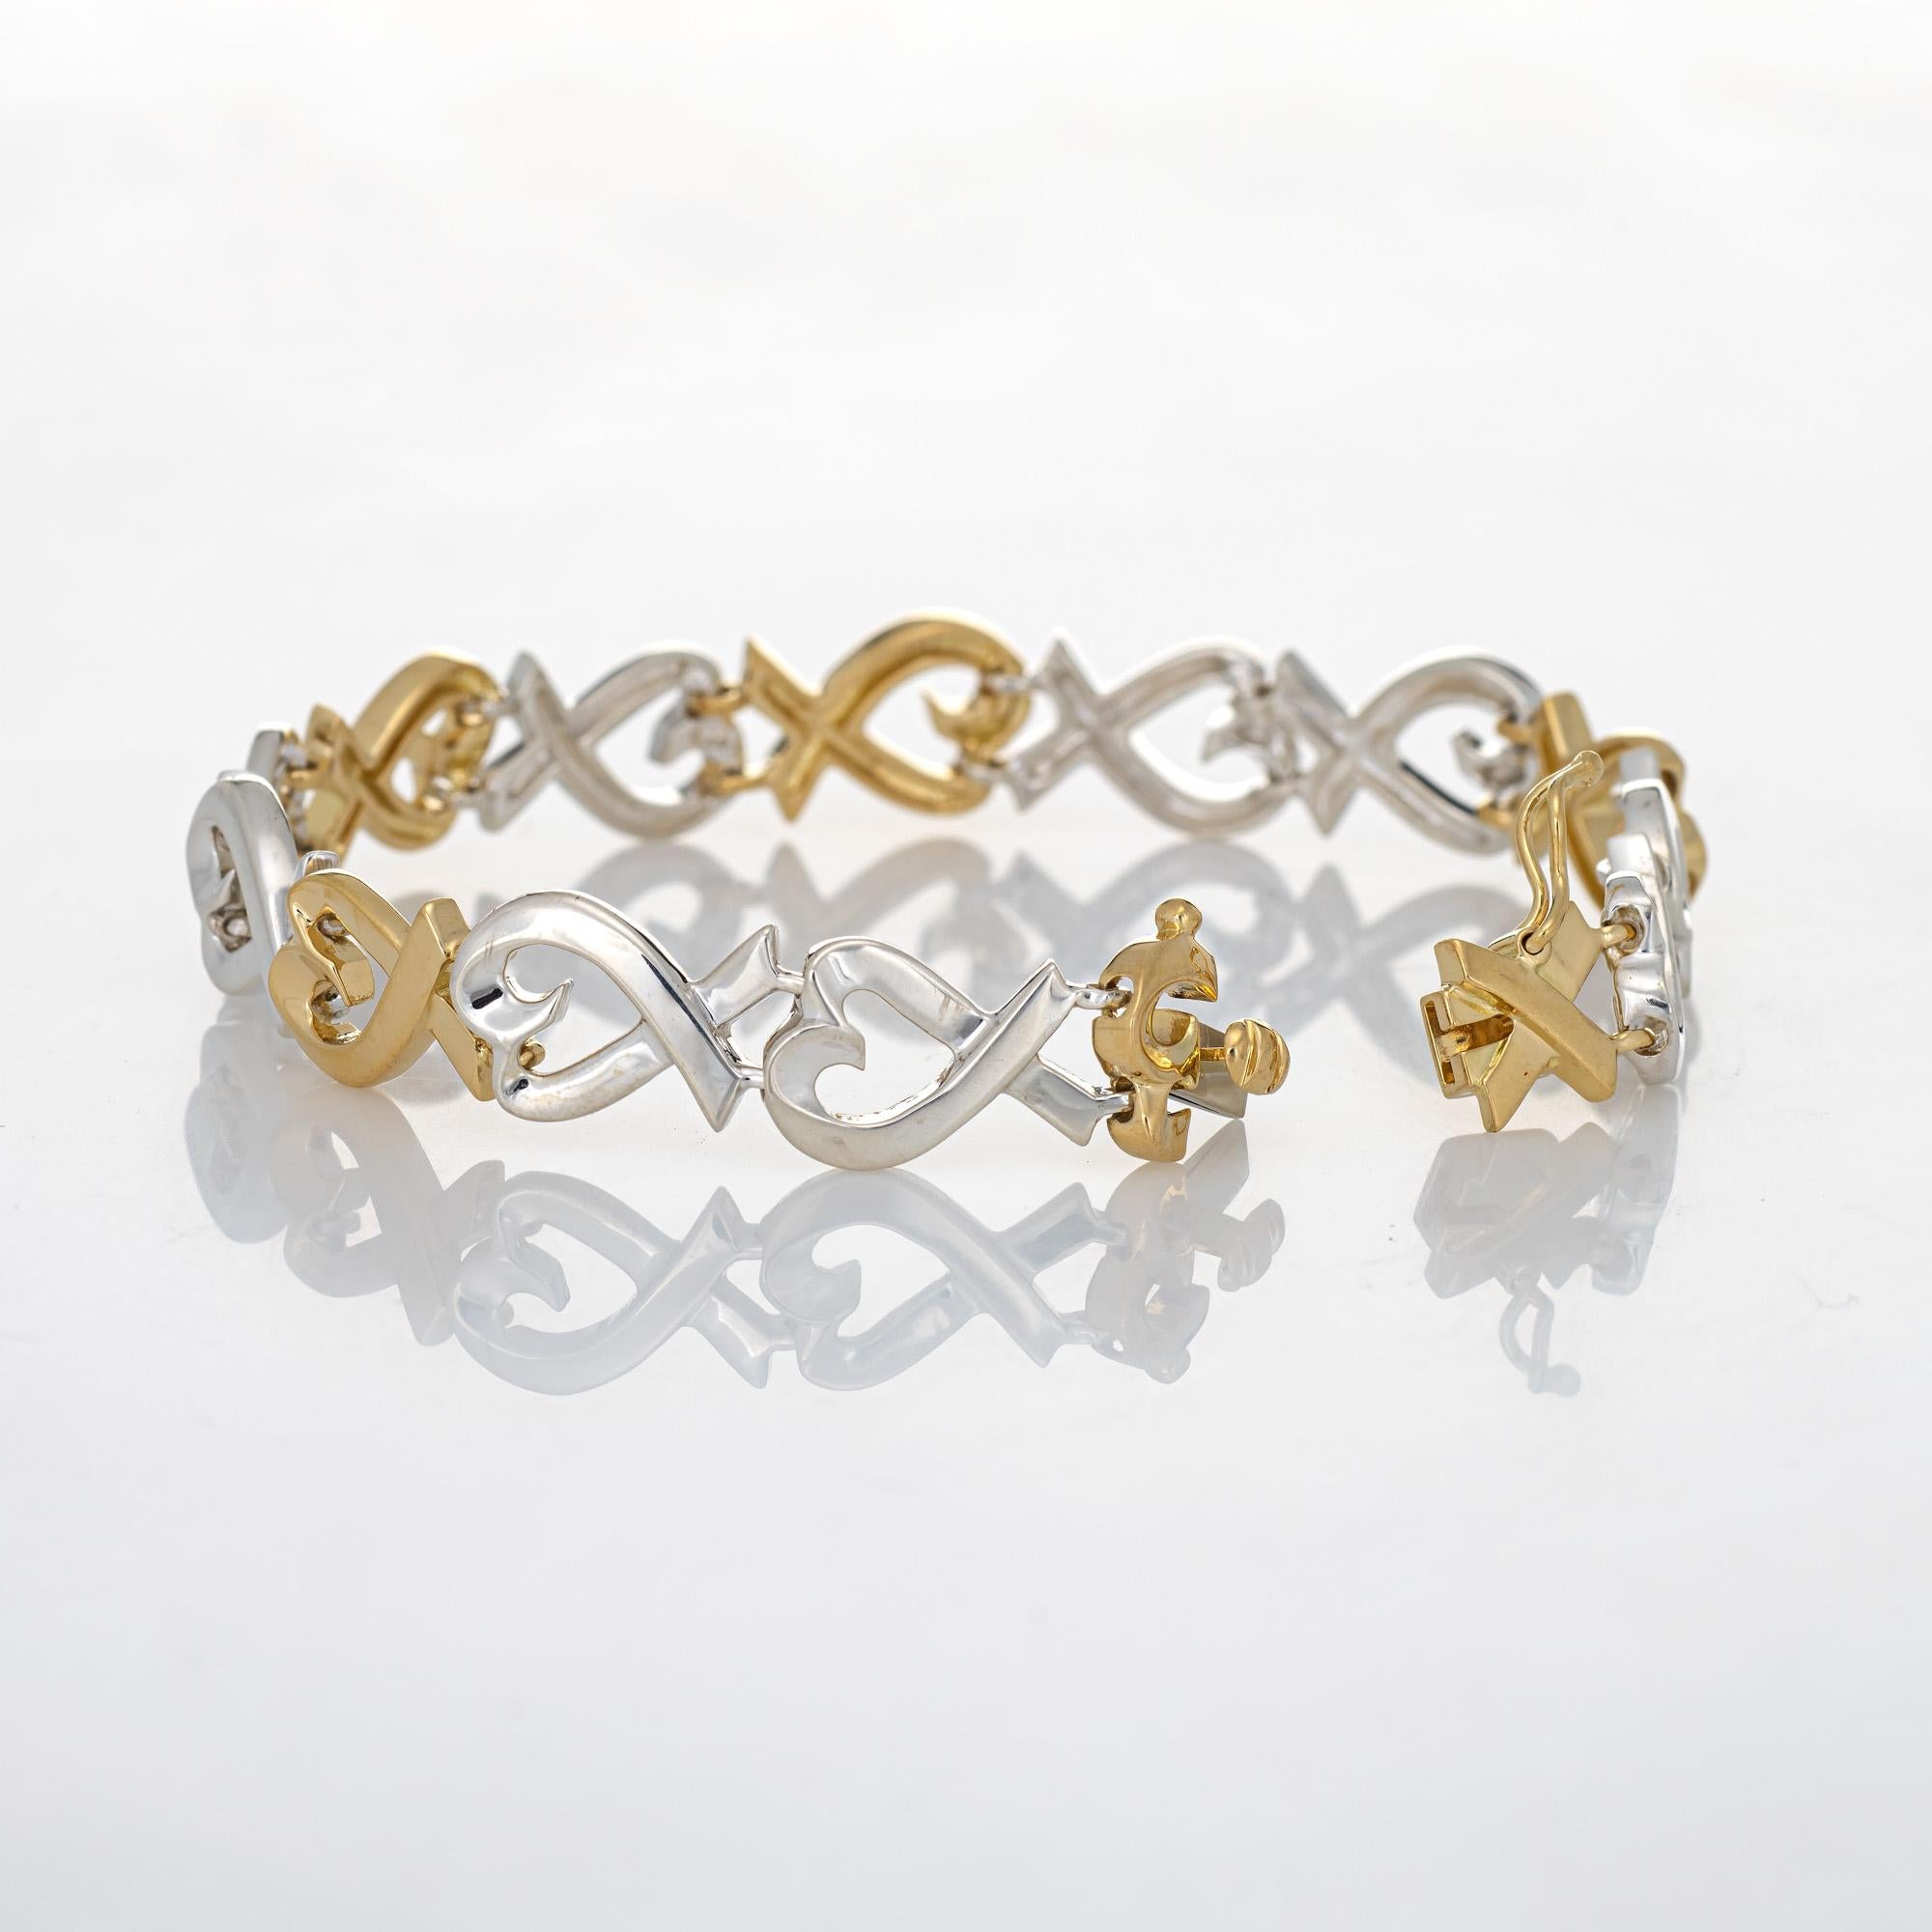 Stylish and finely detailed estate Tiffany & Co Loving Hearts bracelet crafted in 18k yellow gold & sterling silver.  

The bracelet features an alternating pattern of whimsical open hearts in sterling silver & 18k yellow gold. The bracelet is